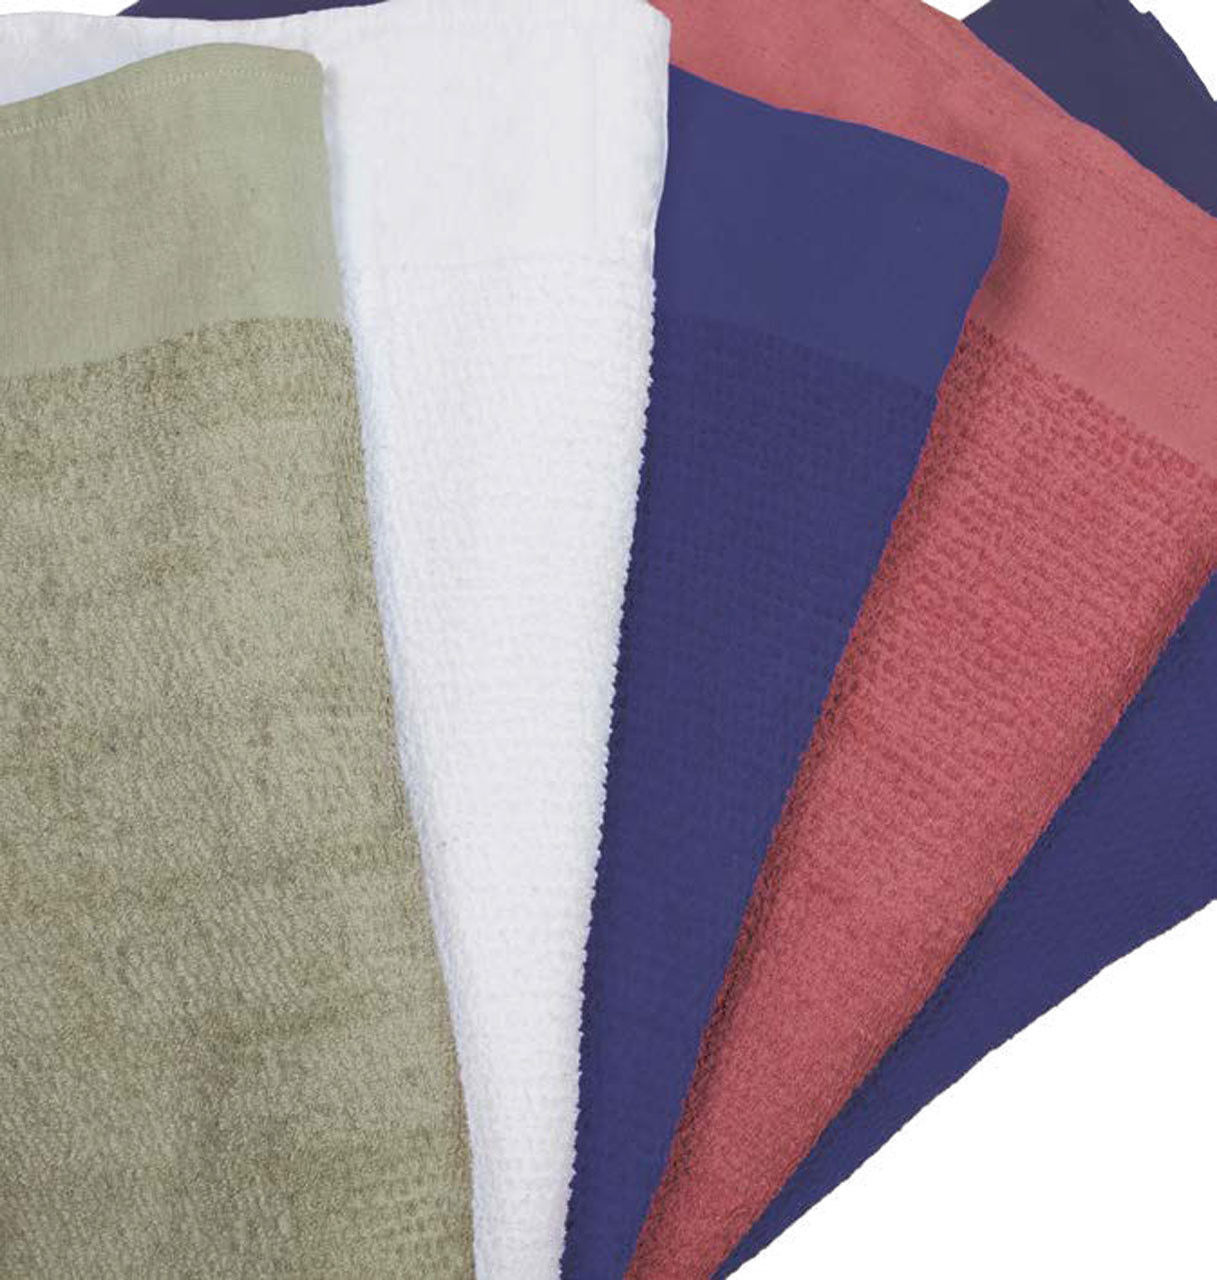 What makes the weave of the terry cloth blanket unique?